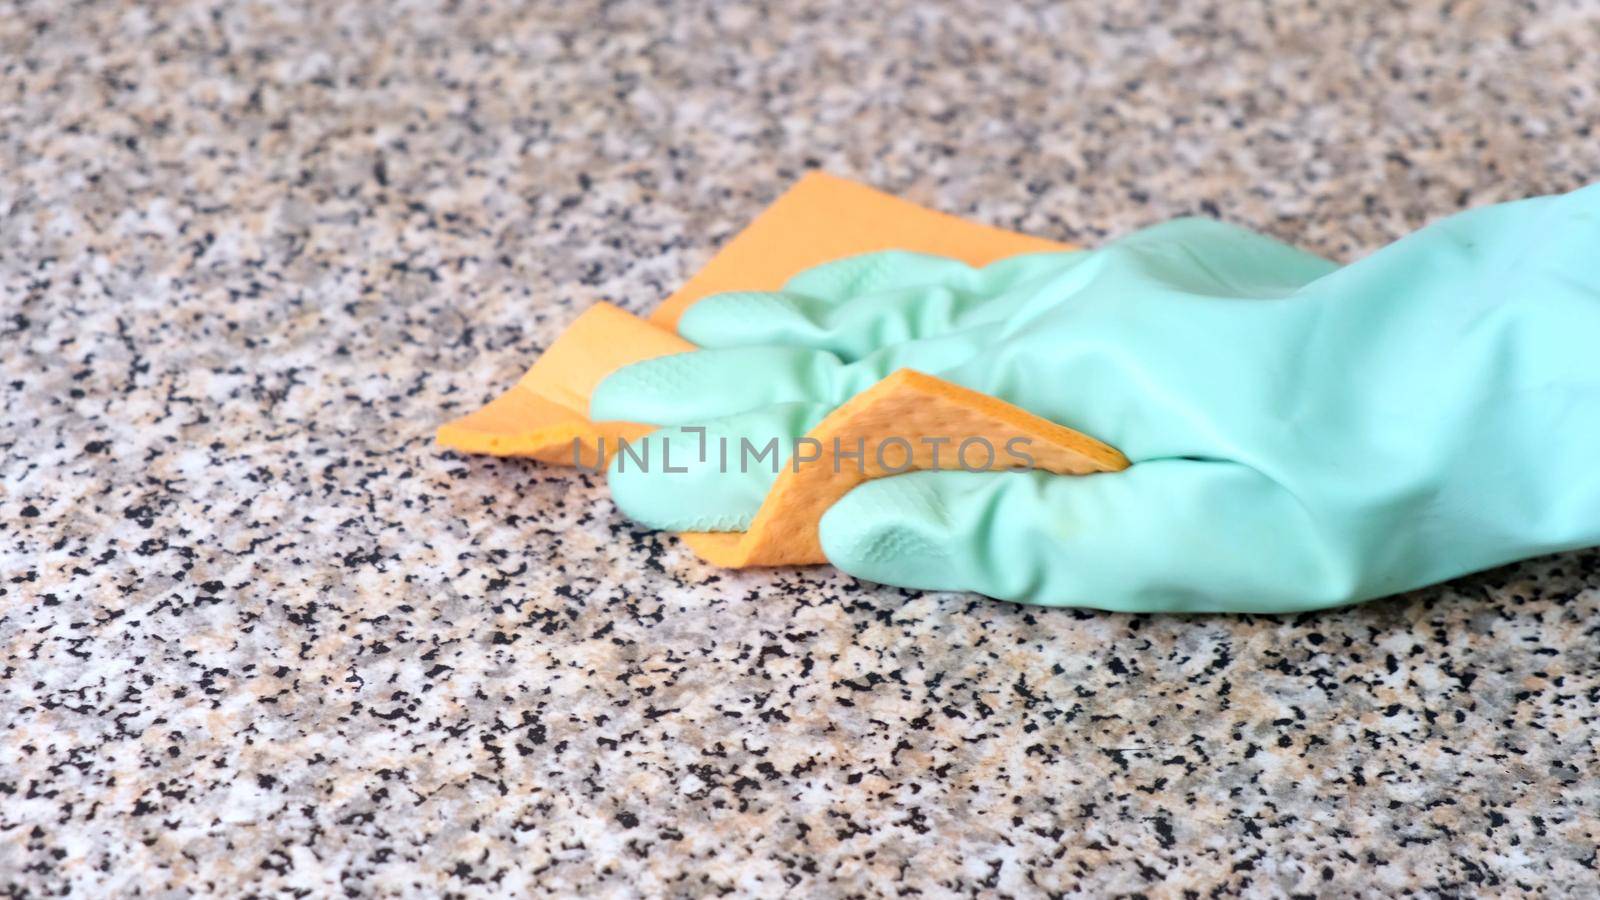 Hand Cleaning Kitchen Work Surface with Rubber Gloves and Disinfectant Spray. The concept of cleaning, help around the house by chelmicky